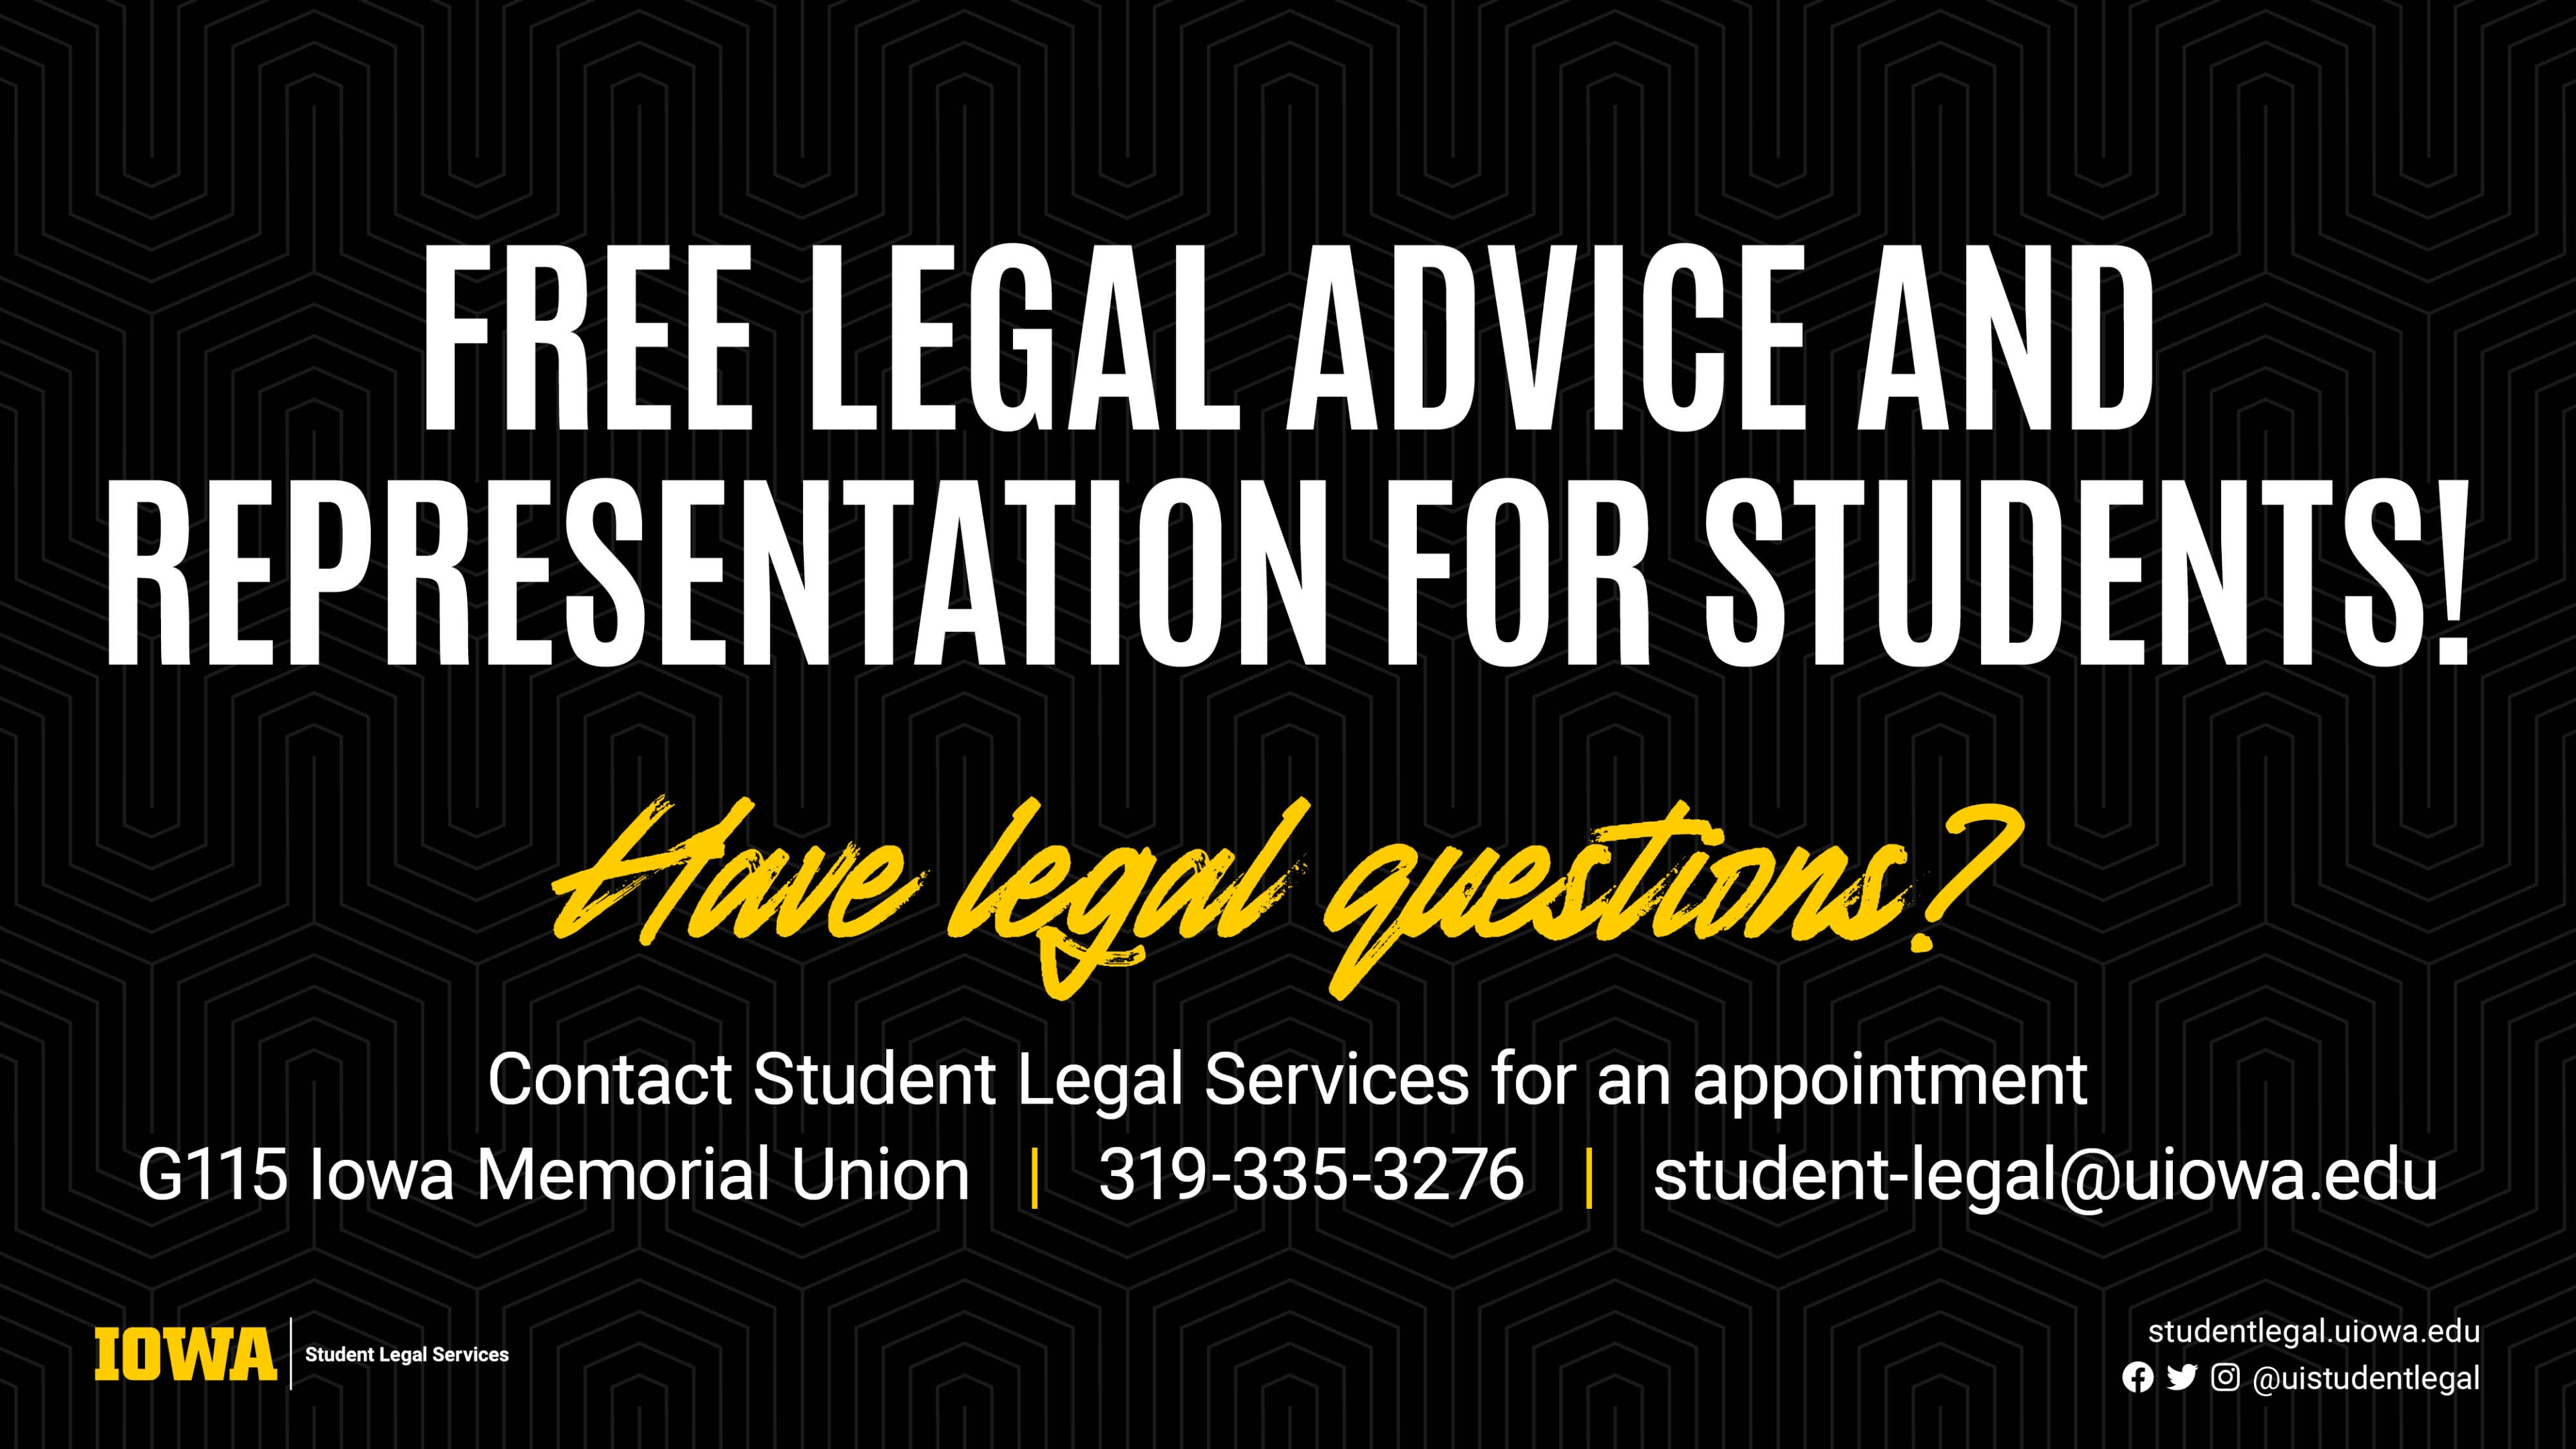 Free legal advice and representation for students! Have legal questions? student-legal@uiowa.edu